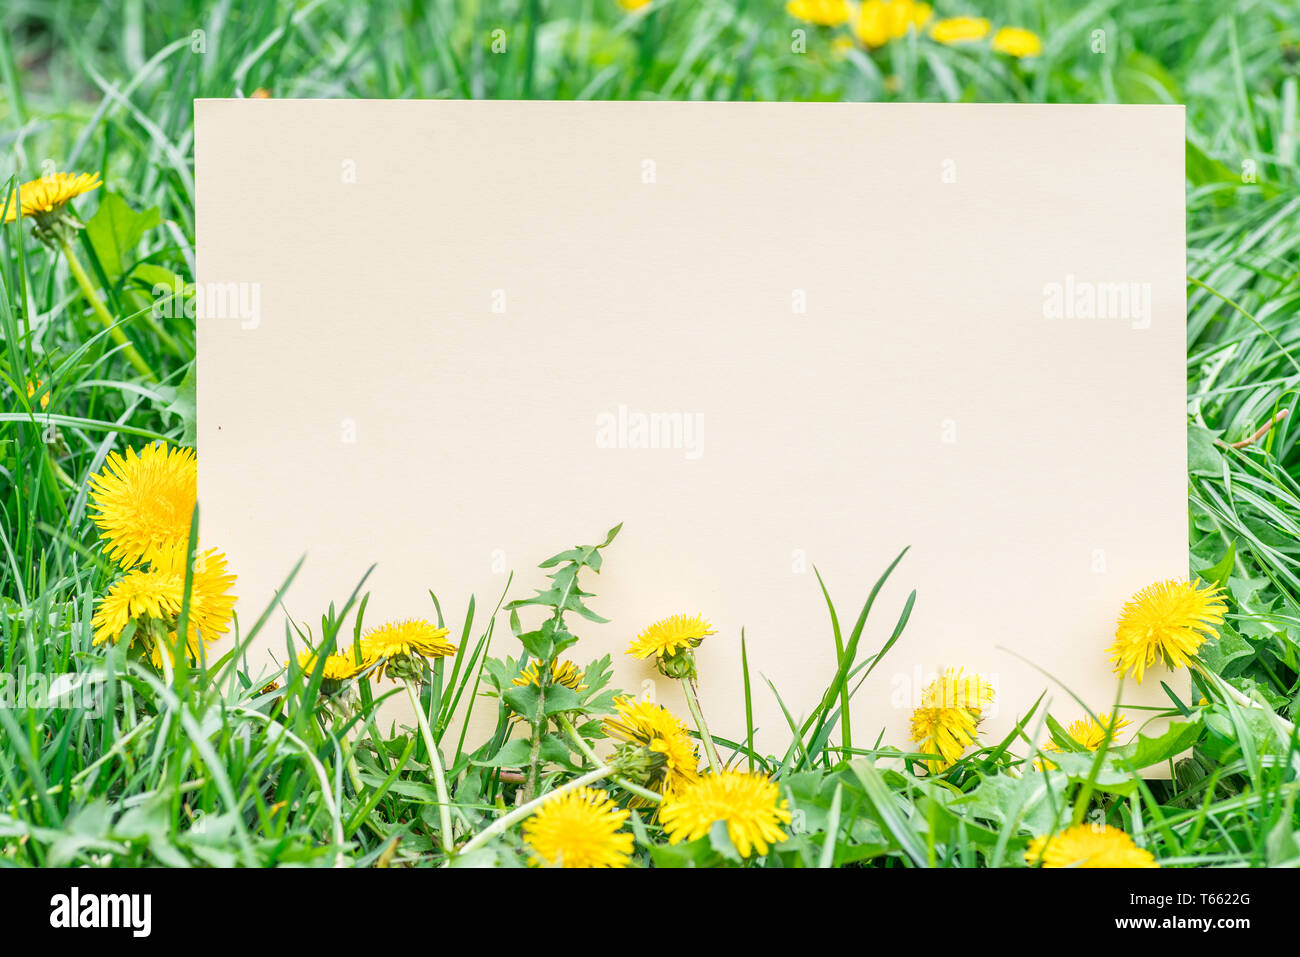 Yellow paper blank on the green grass and dandelions. Green grass as a frame. Stock Photo